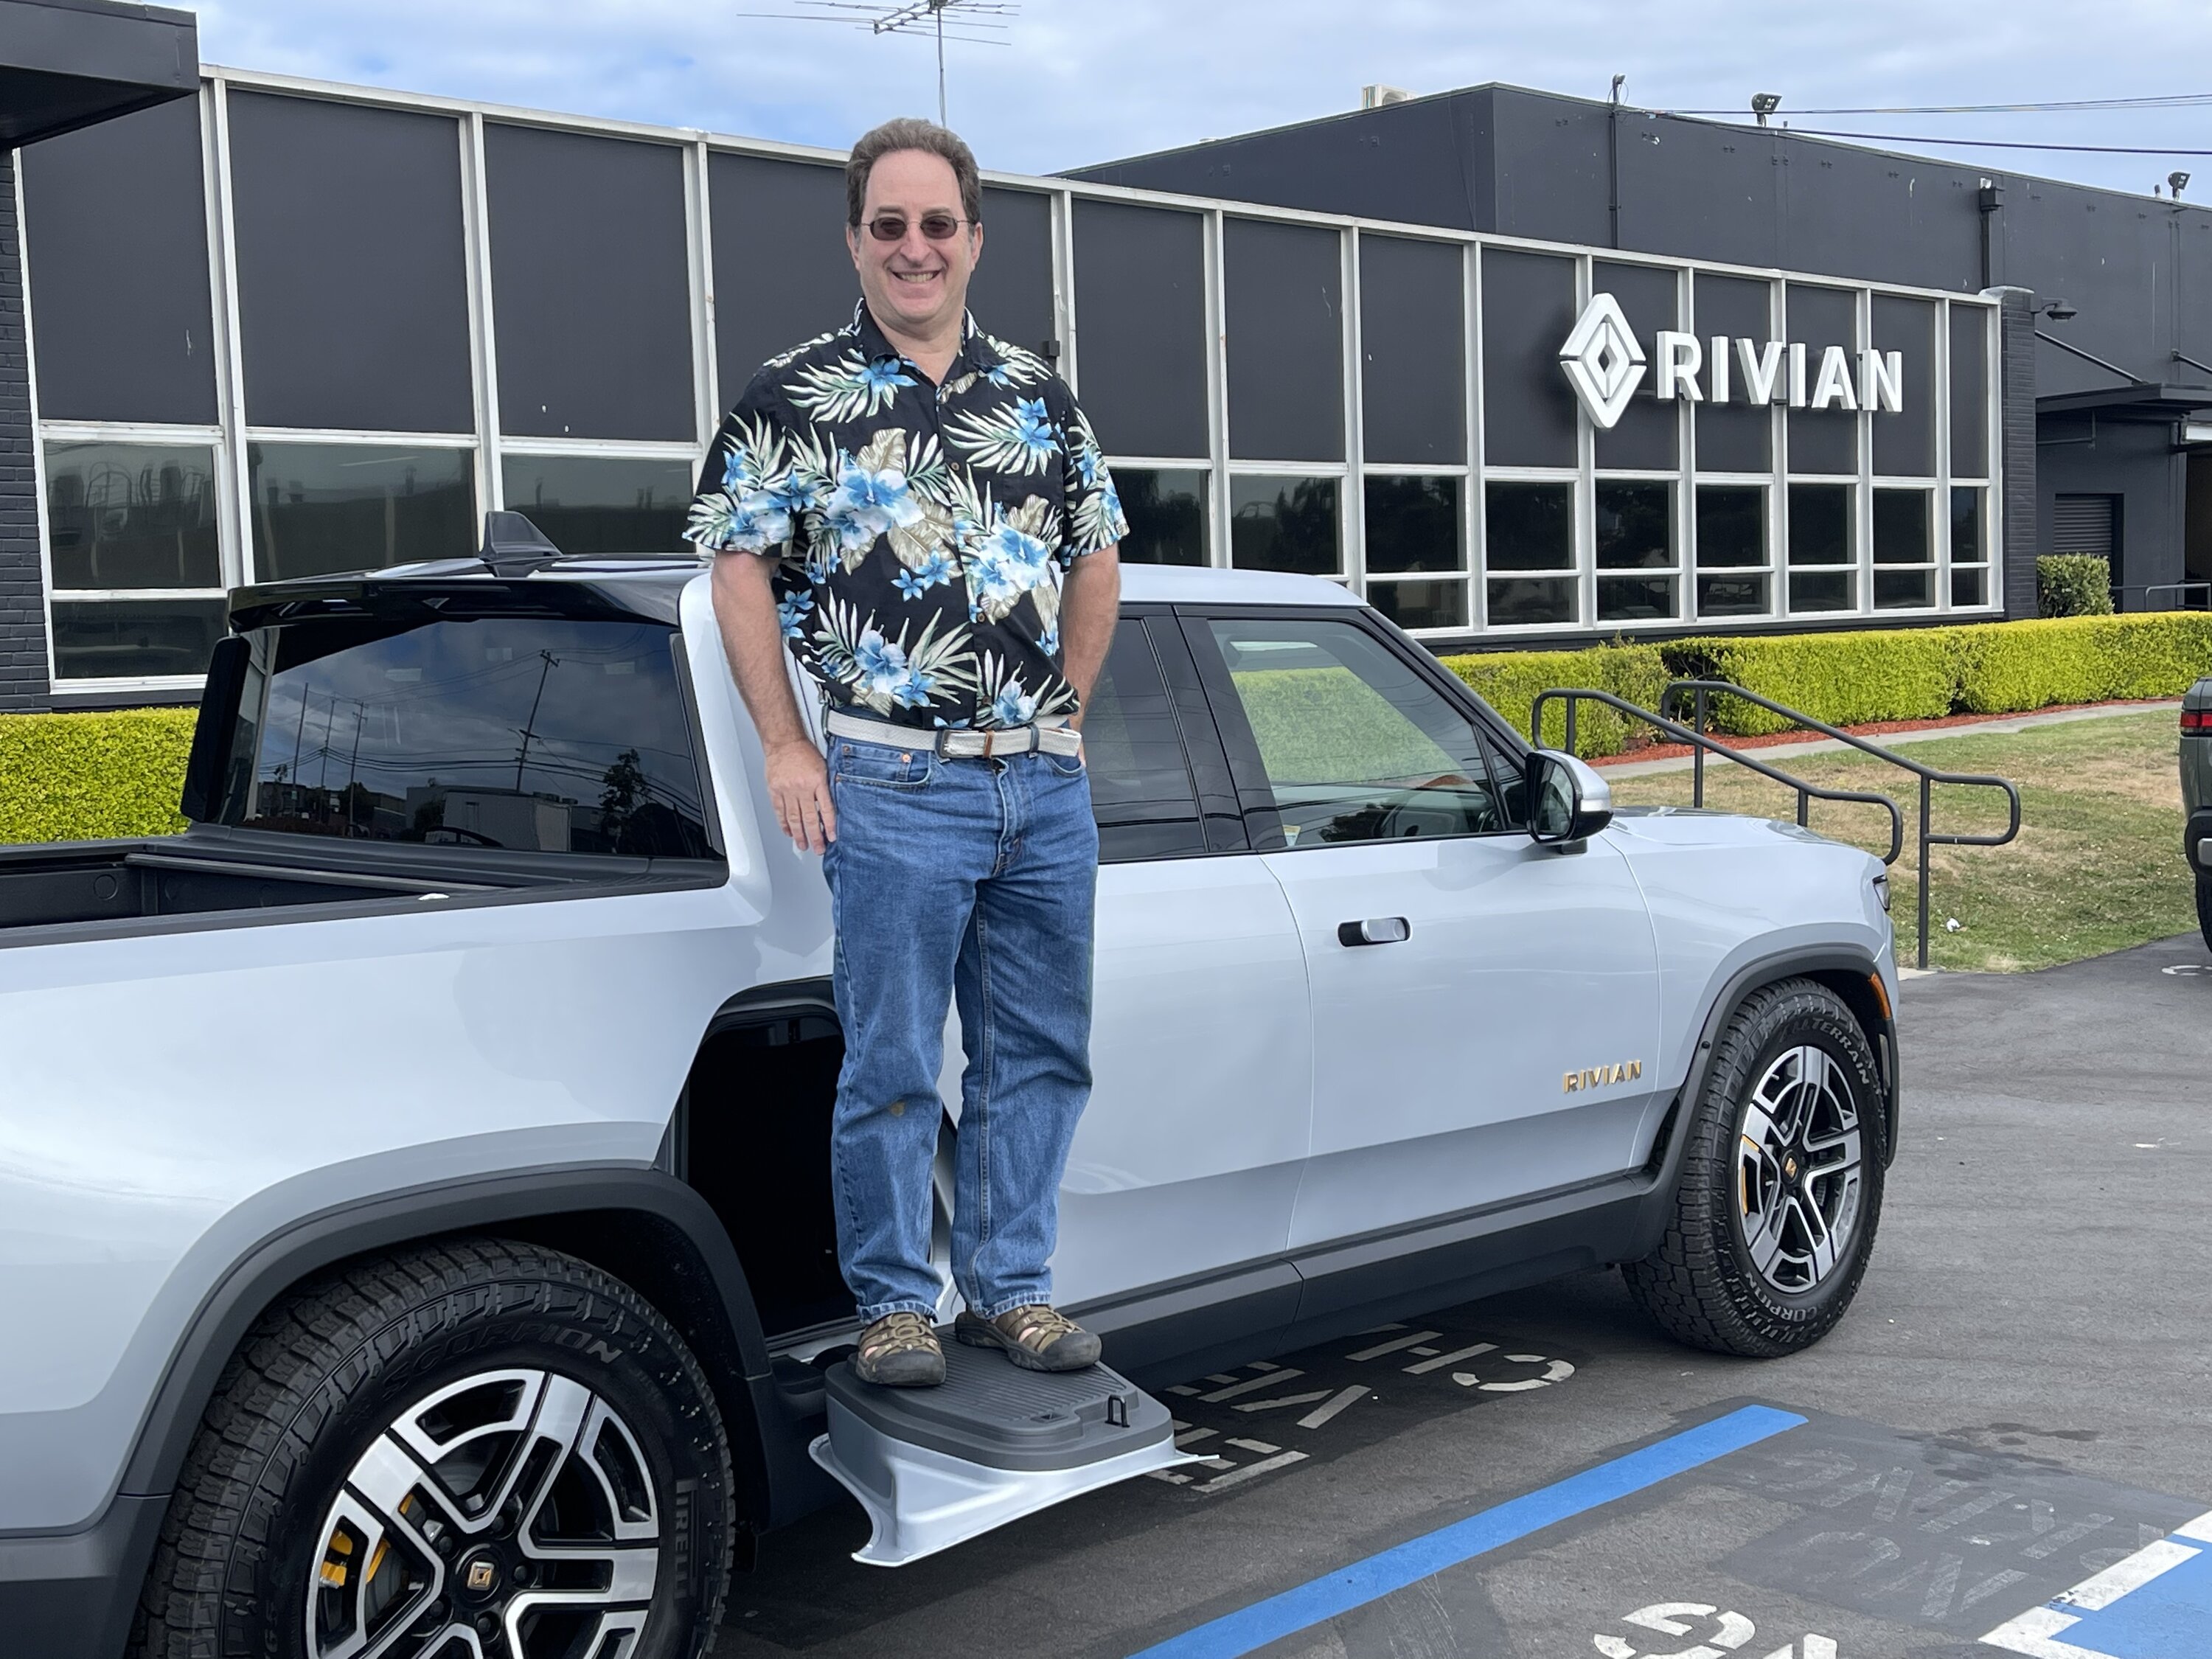 Rivian R1T R1S 📸 Post Your Best Photo Here For Year-End Rivian Mosaic! B46F658C-11FB-45C4-90F2-44E0FDEB57F1